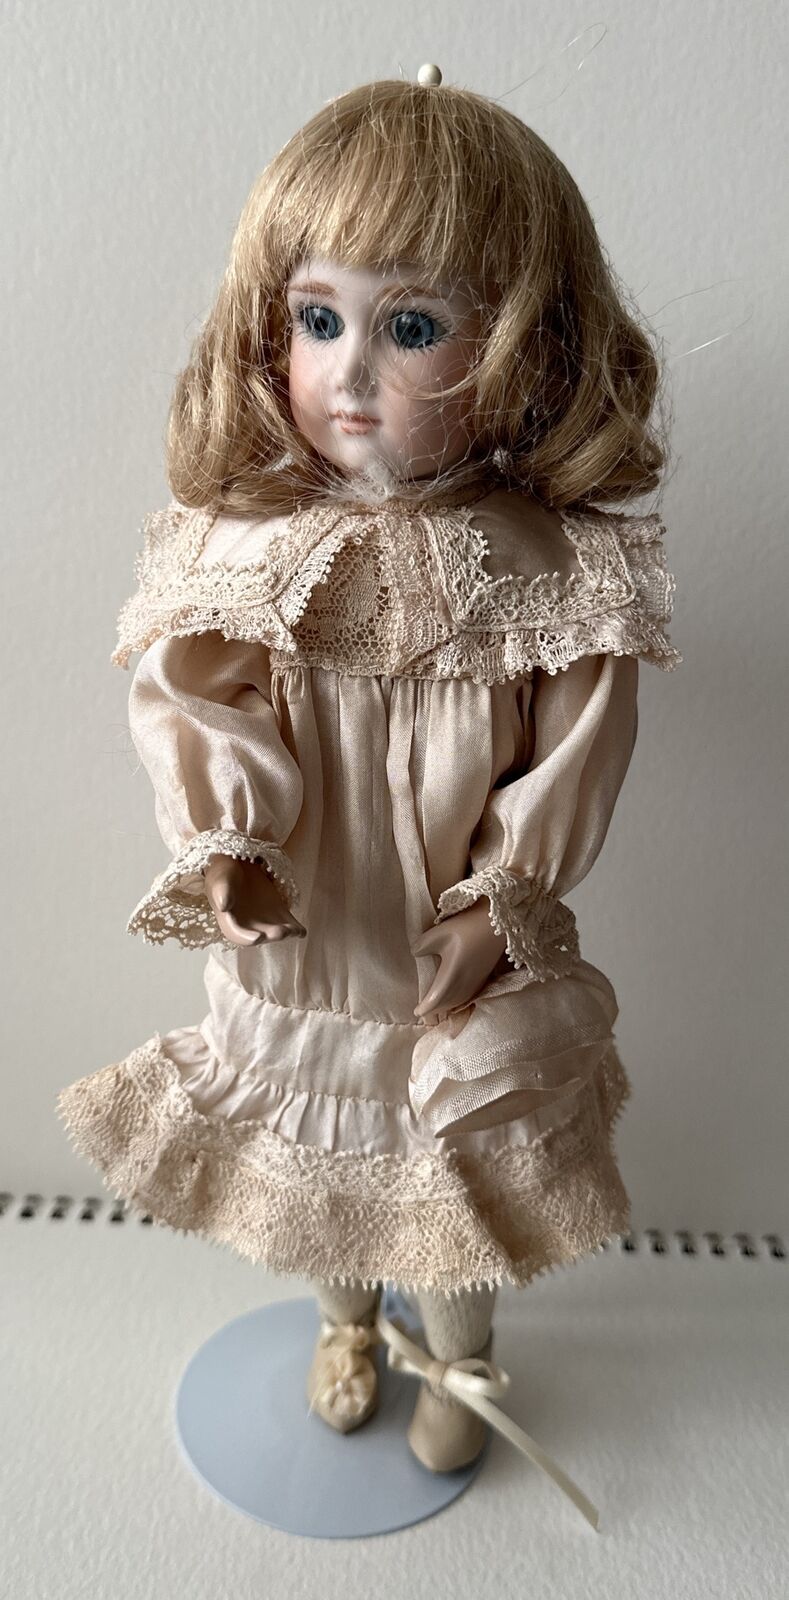 Antique Andre Thuillier A9T Bisque Head Bebe Artist Signed Repro 11” Doll